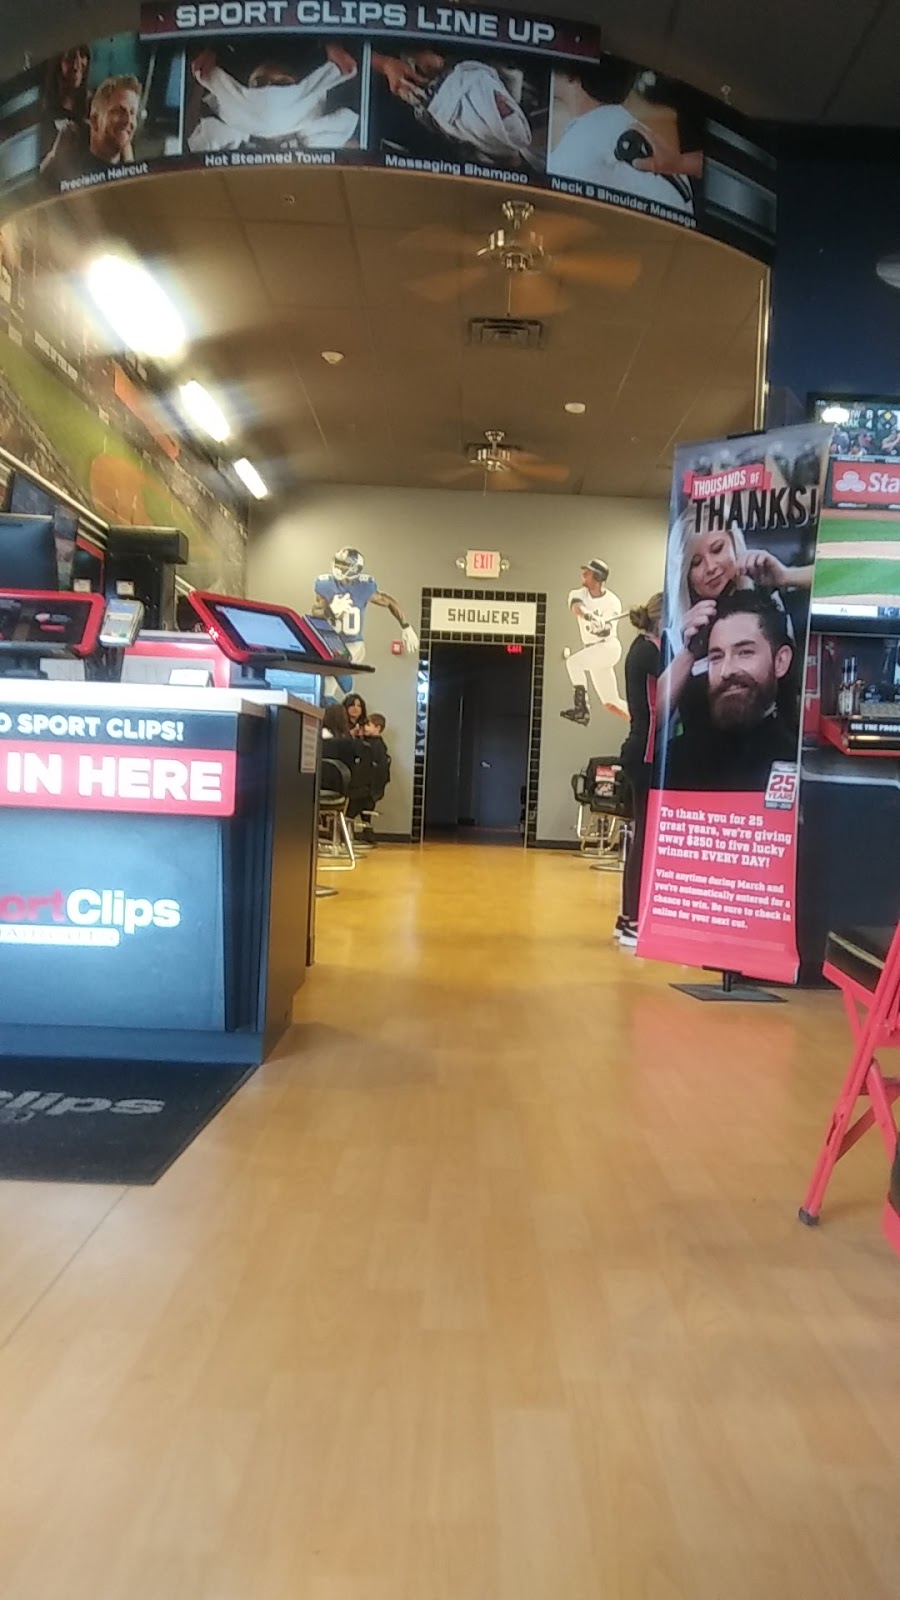 Sport Clips Haircuts of Selden | 367 Independence Plaza, Selden, NY 11784 | Phone: (631) 946-6988